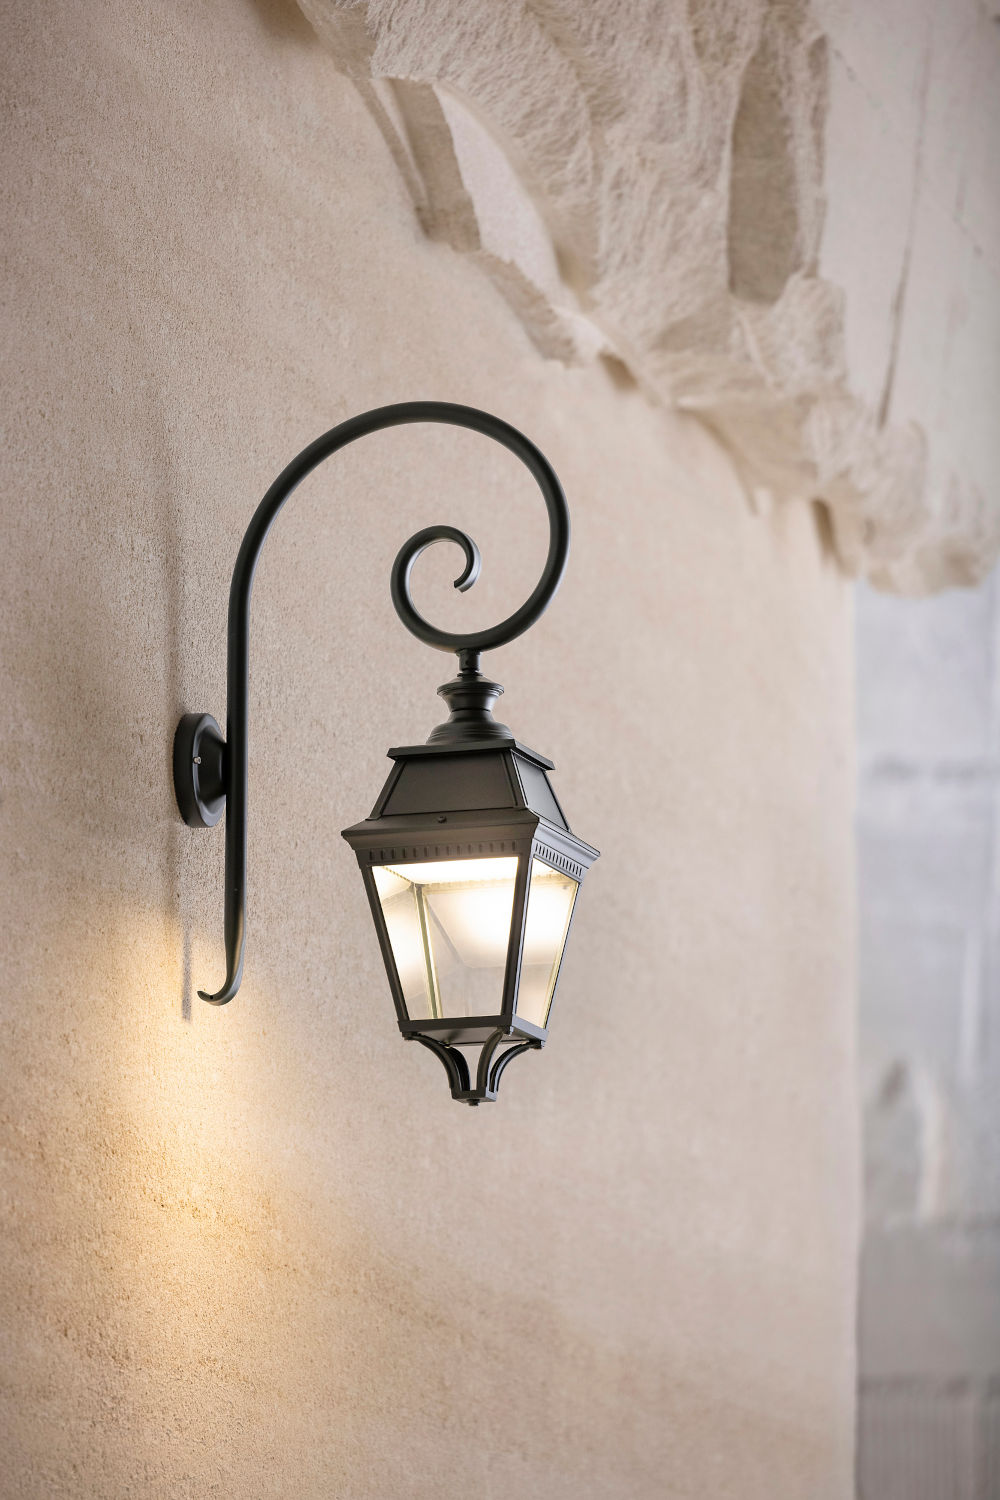 Large Outdoor Wall Lantern Avenue 3 with Crozier: LED Version (bitte anfragen)